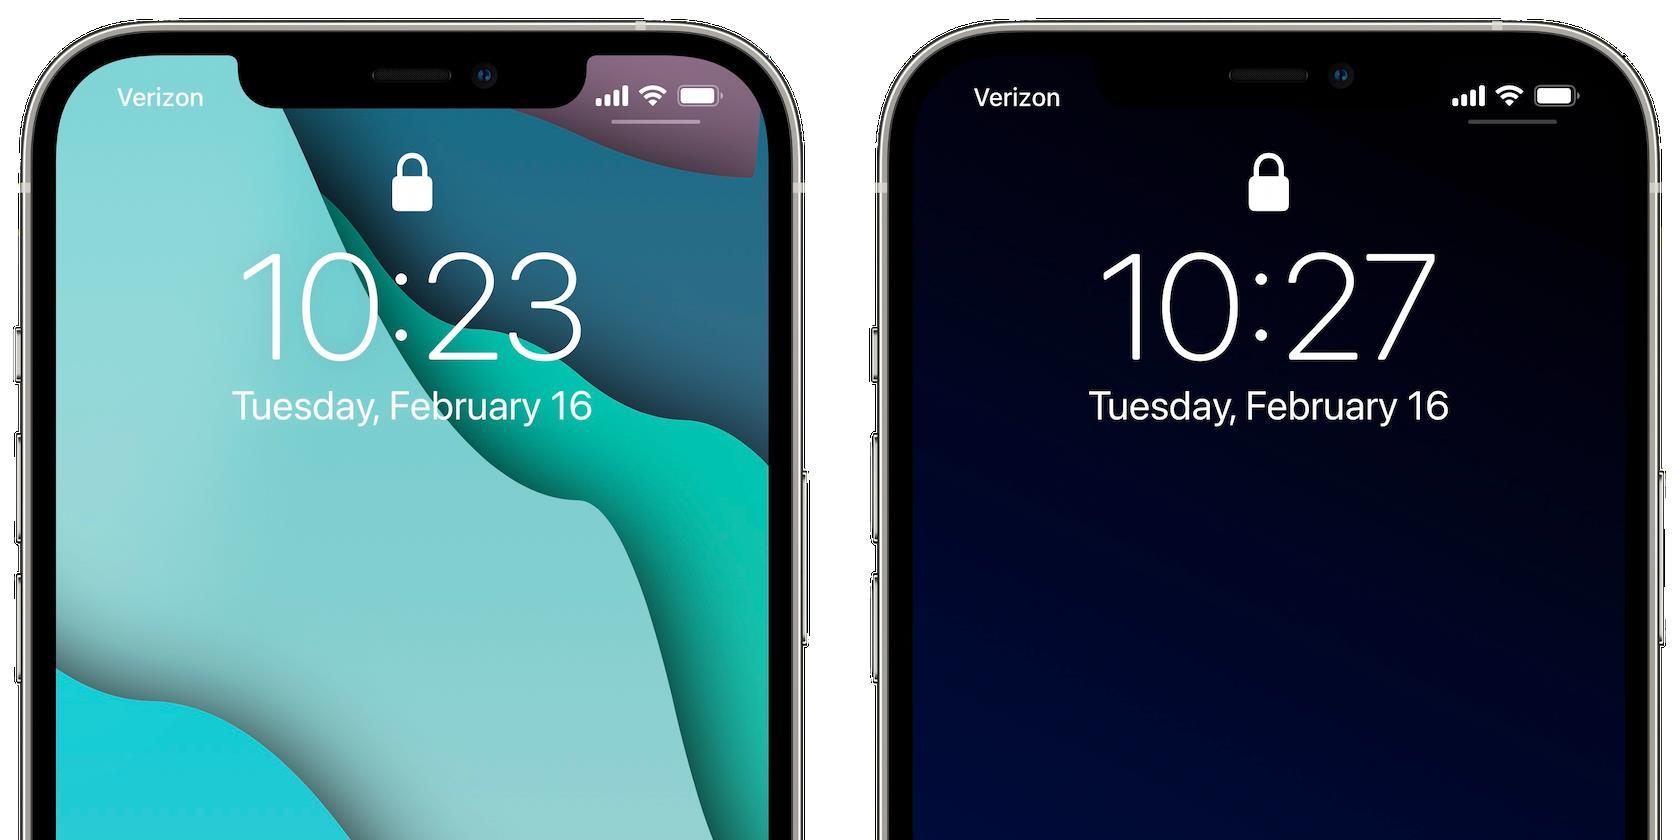 How To Automatically Change Your Iphone Wallpaper On A Schedule